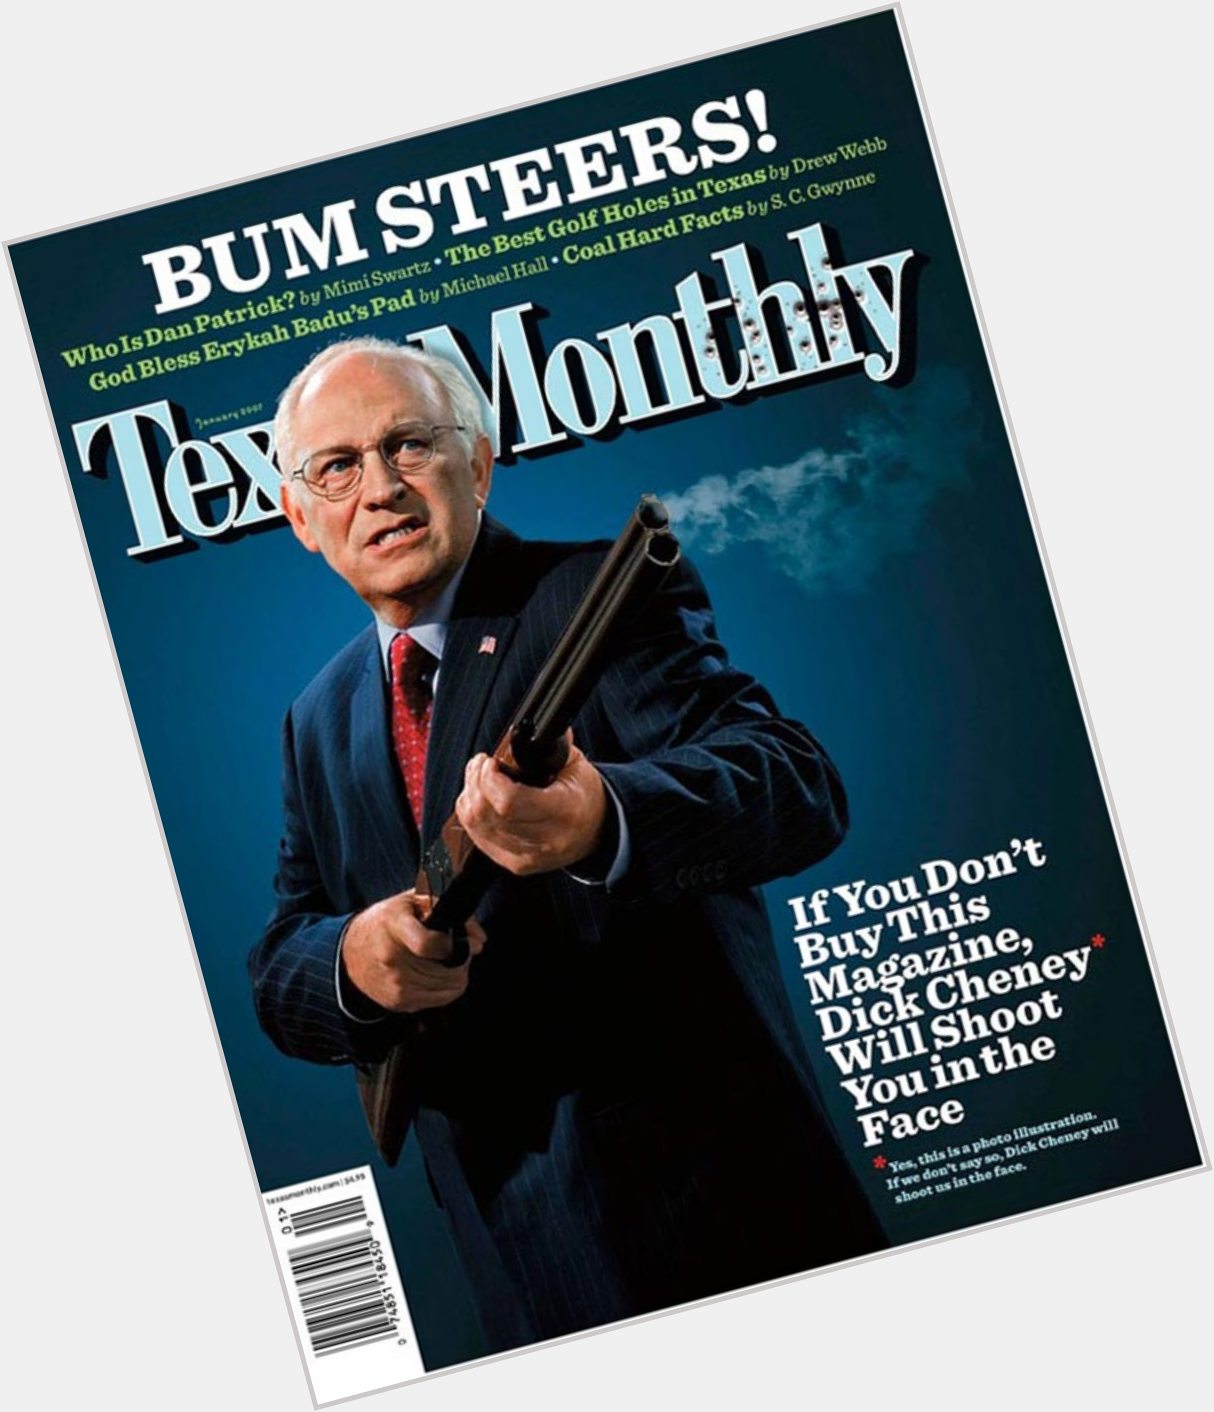 Happy birthday Dick Cheney! This cover never ever gets old. 